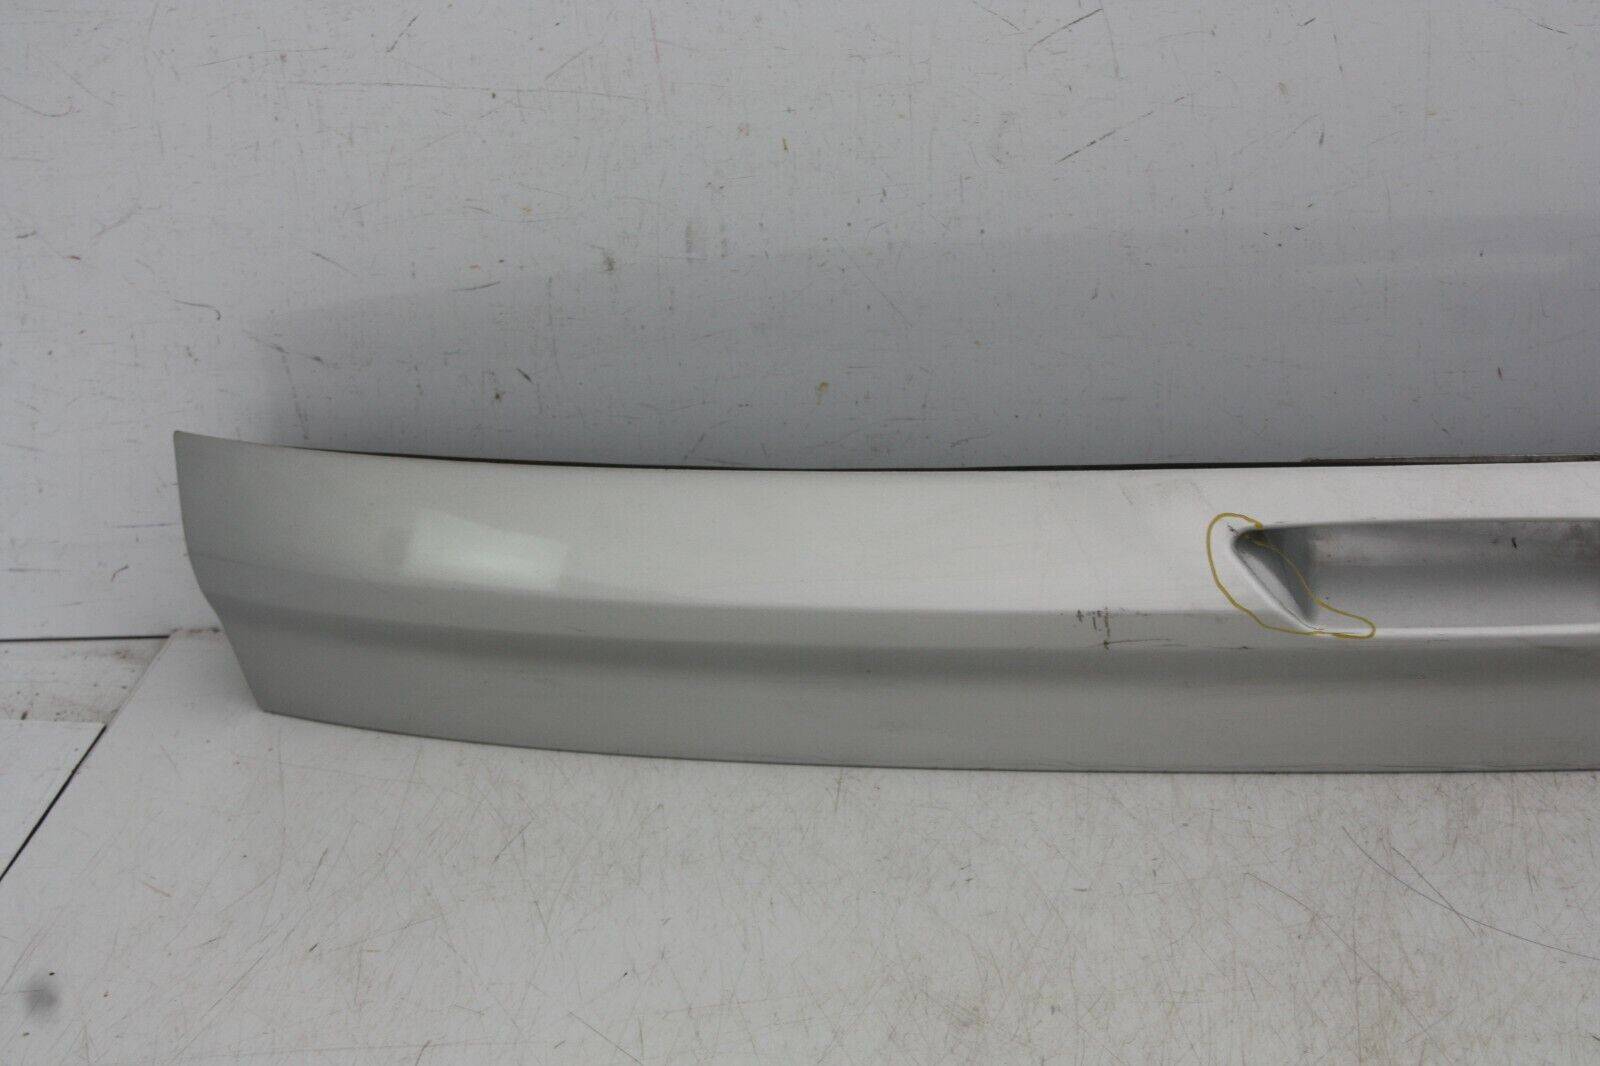 Ford-Kuga-Rear-Tailgate-Boot-Cover-Lower-Section-CJ54-S423A40-A-Genuine-175367544166-2